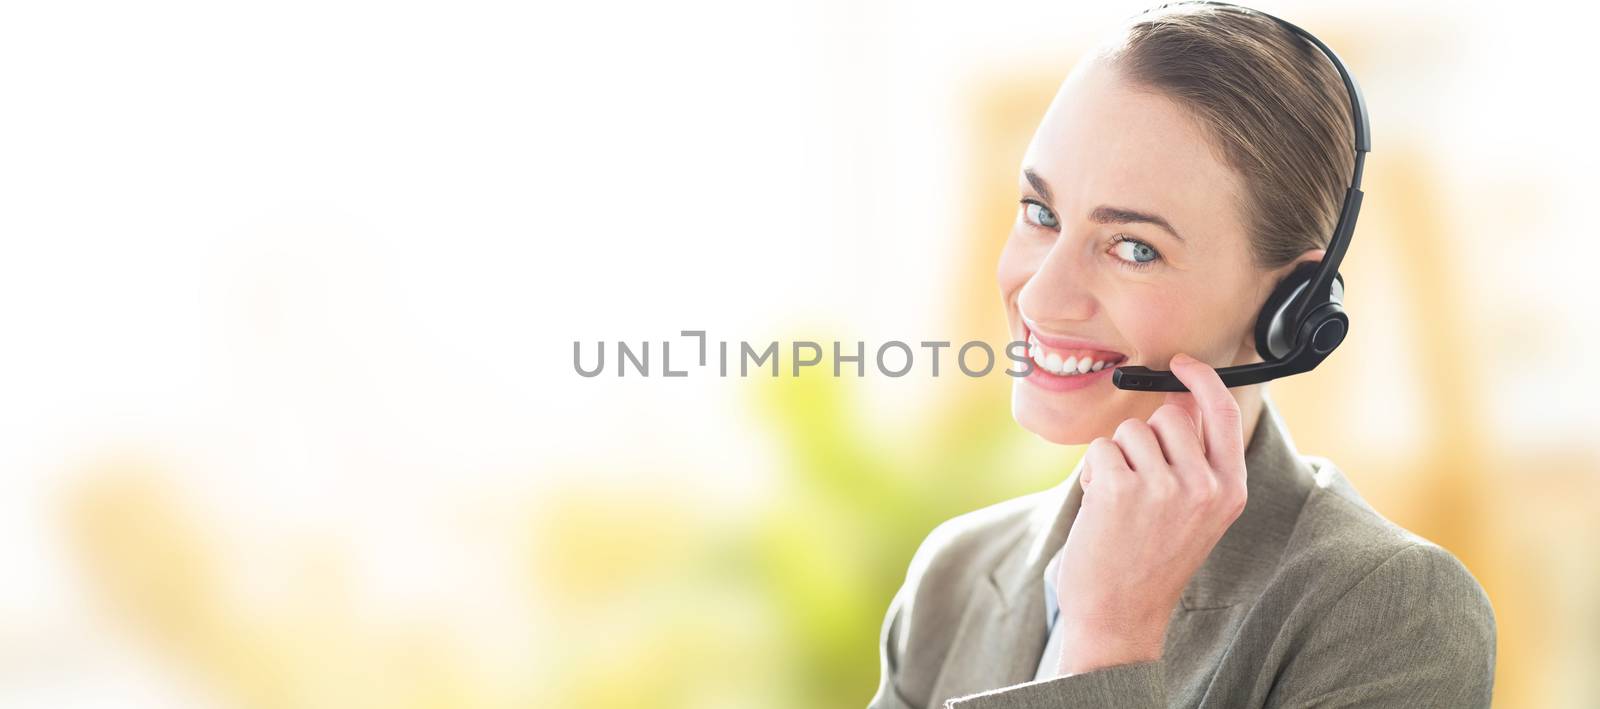 Composite image of smiling businesswoman with headset using computers by Wavebreakmedia